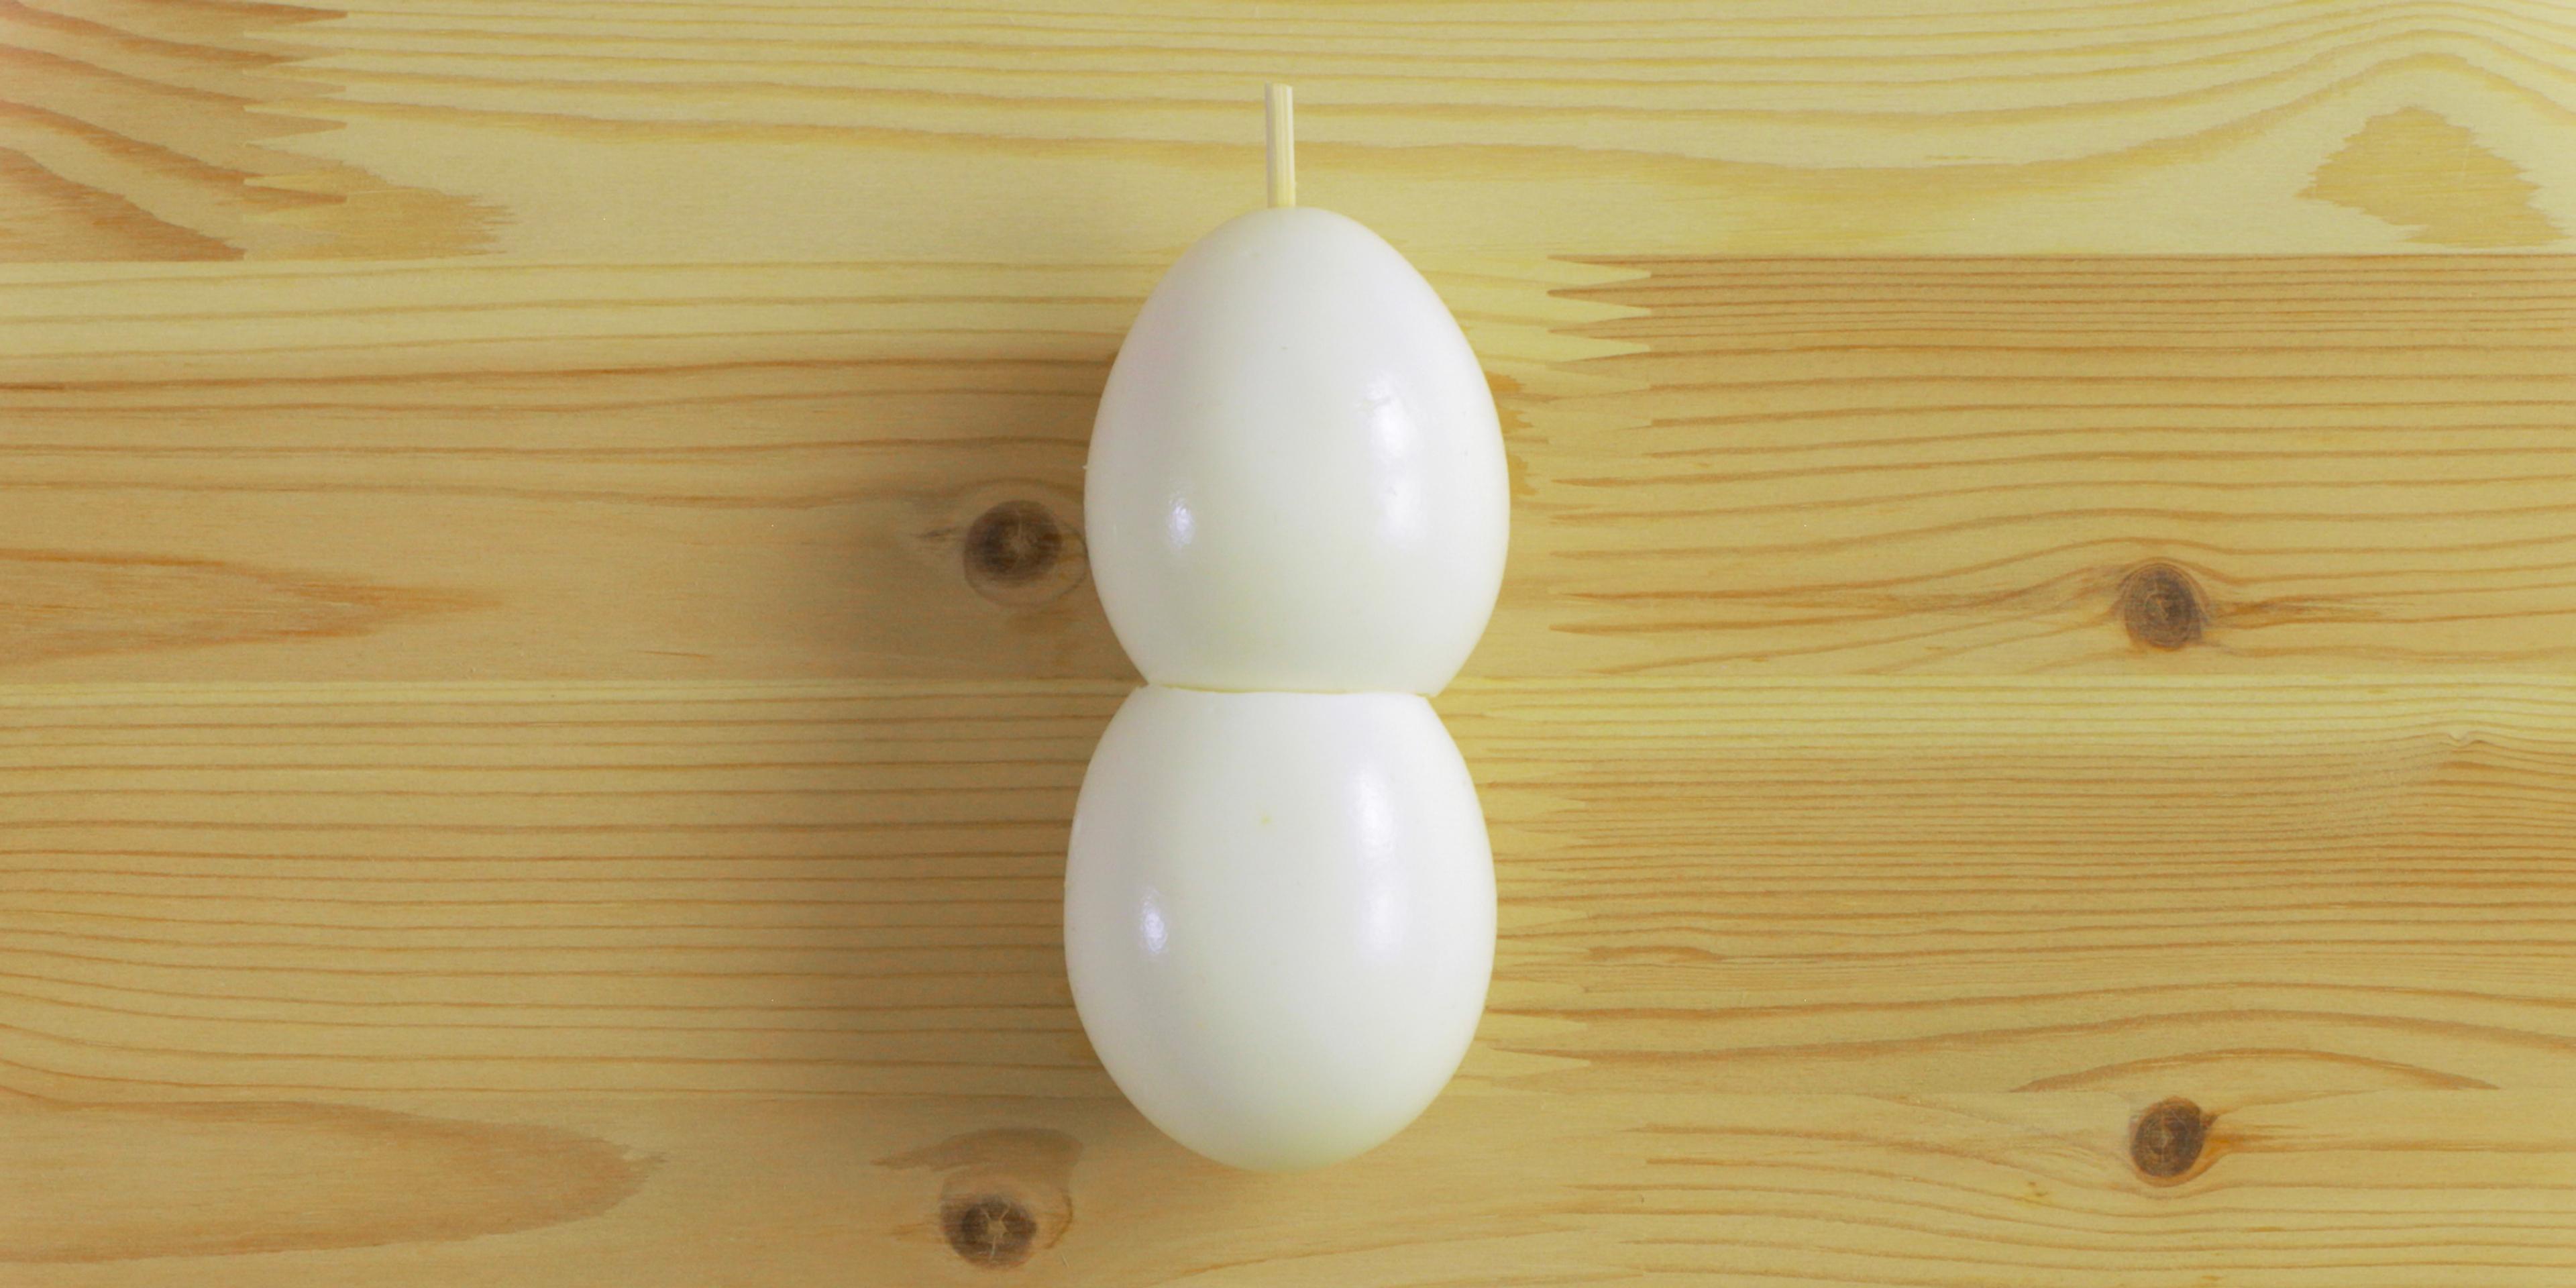 Two eggs with a skewer through them to create a snowman.